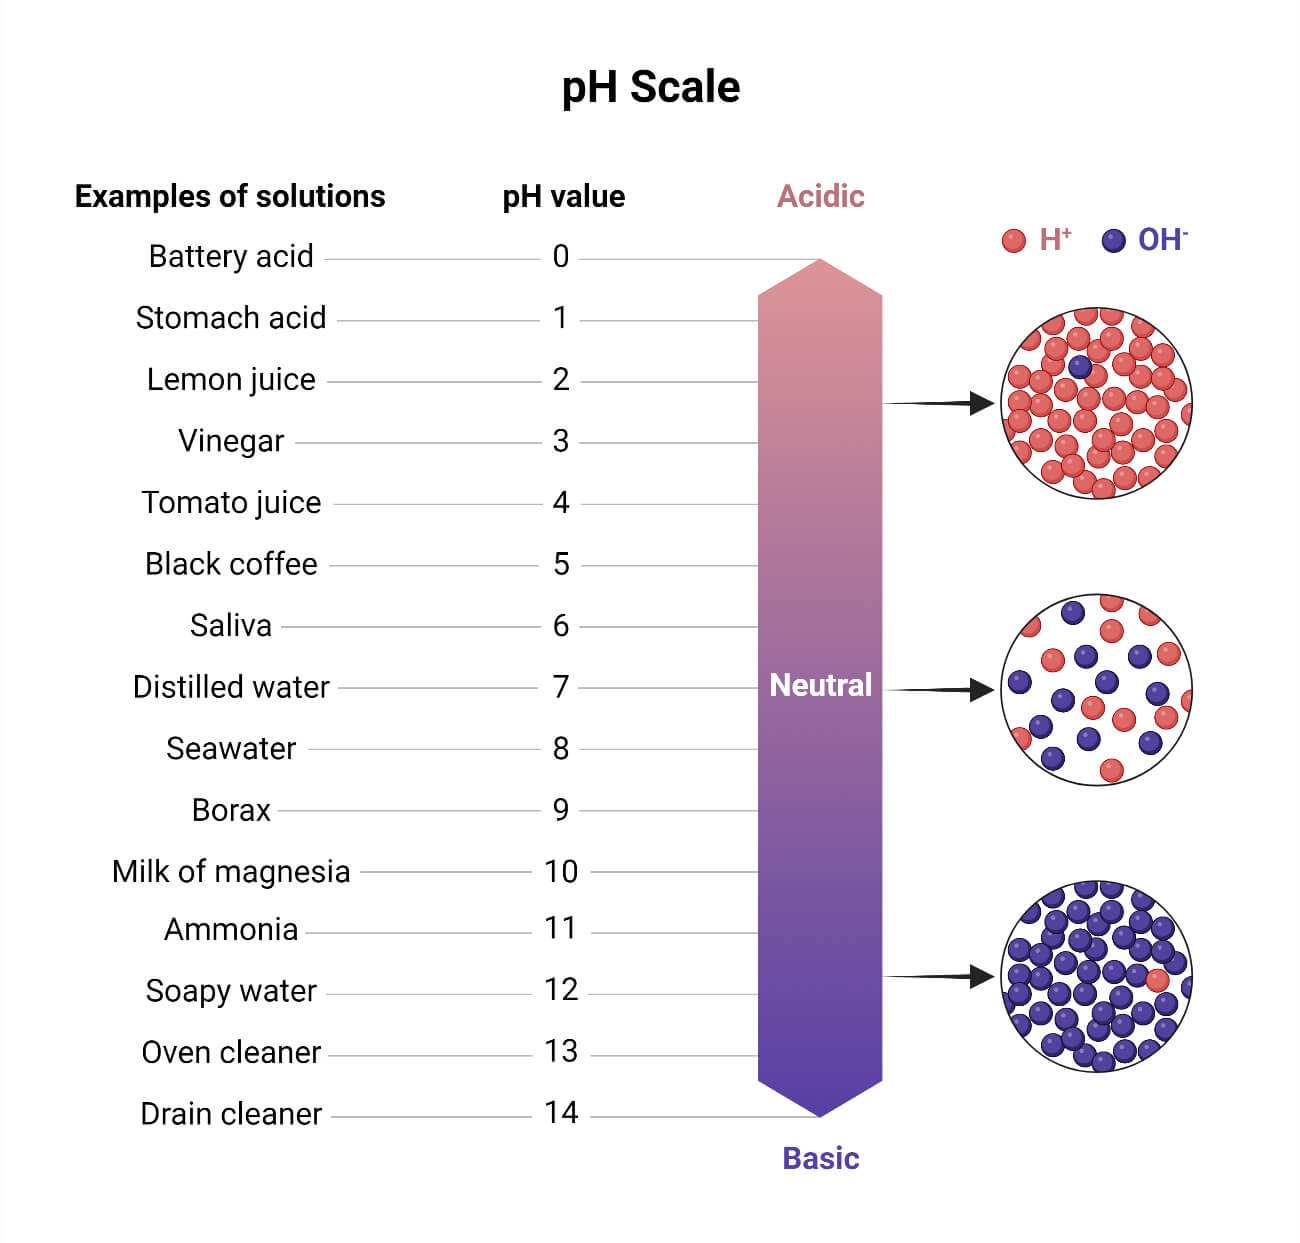 pH Scale with Solution Examples